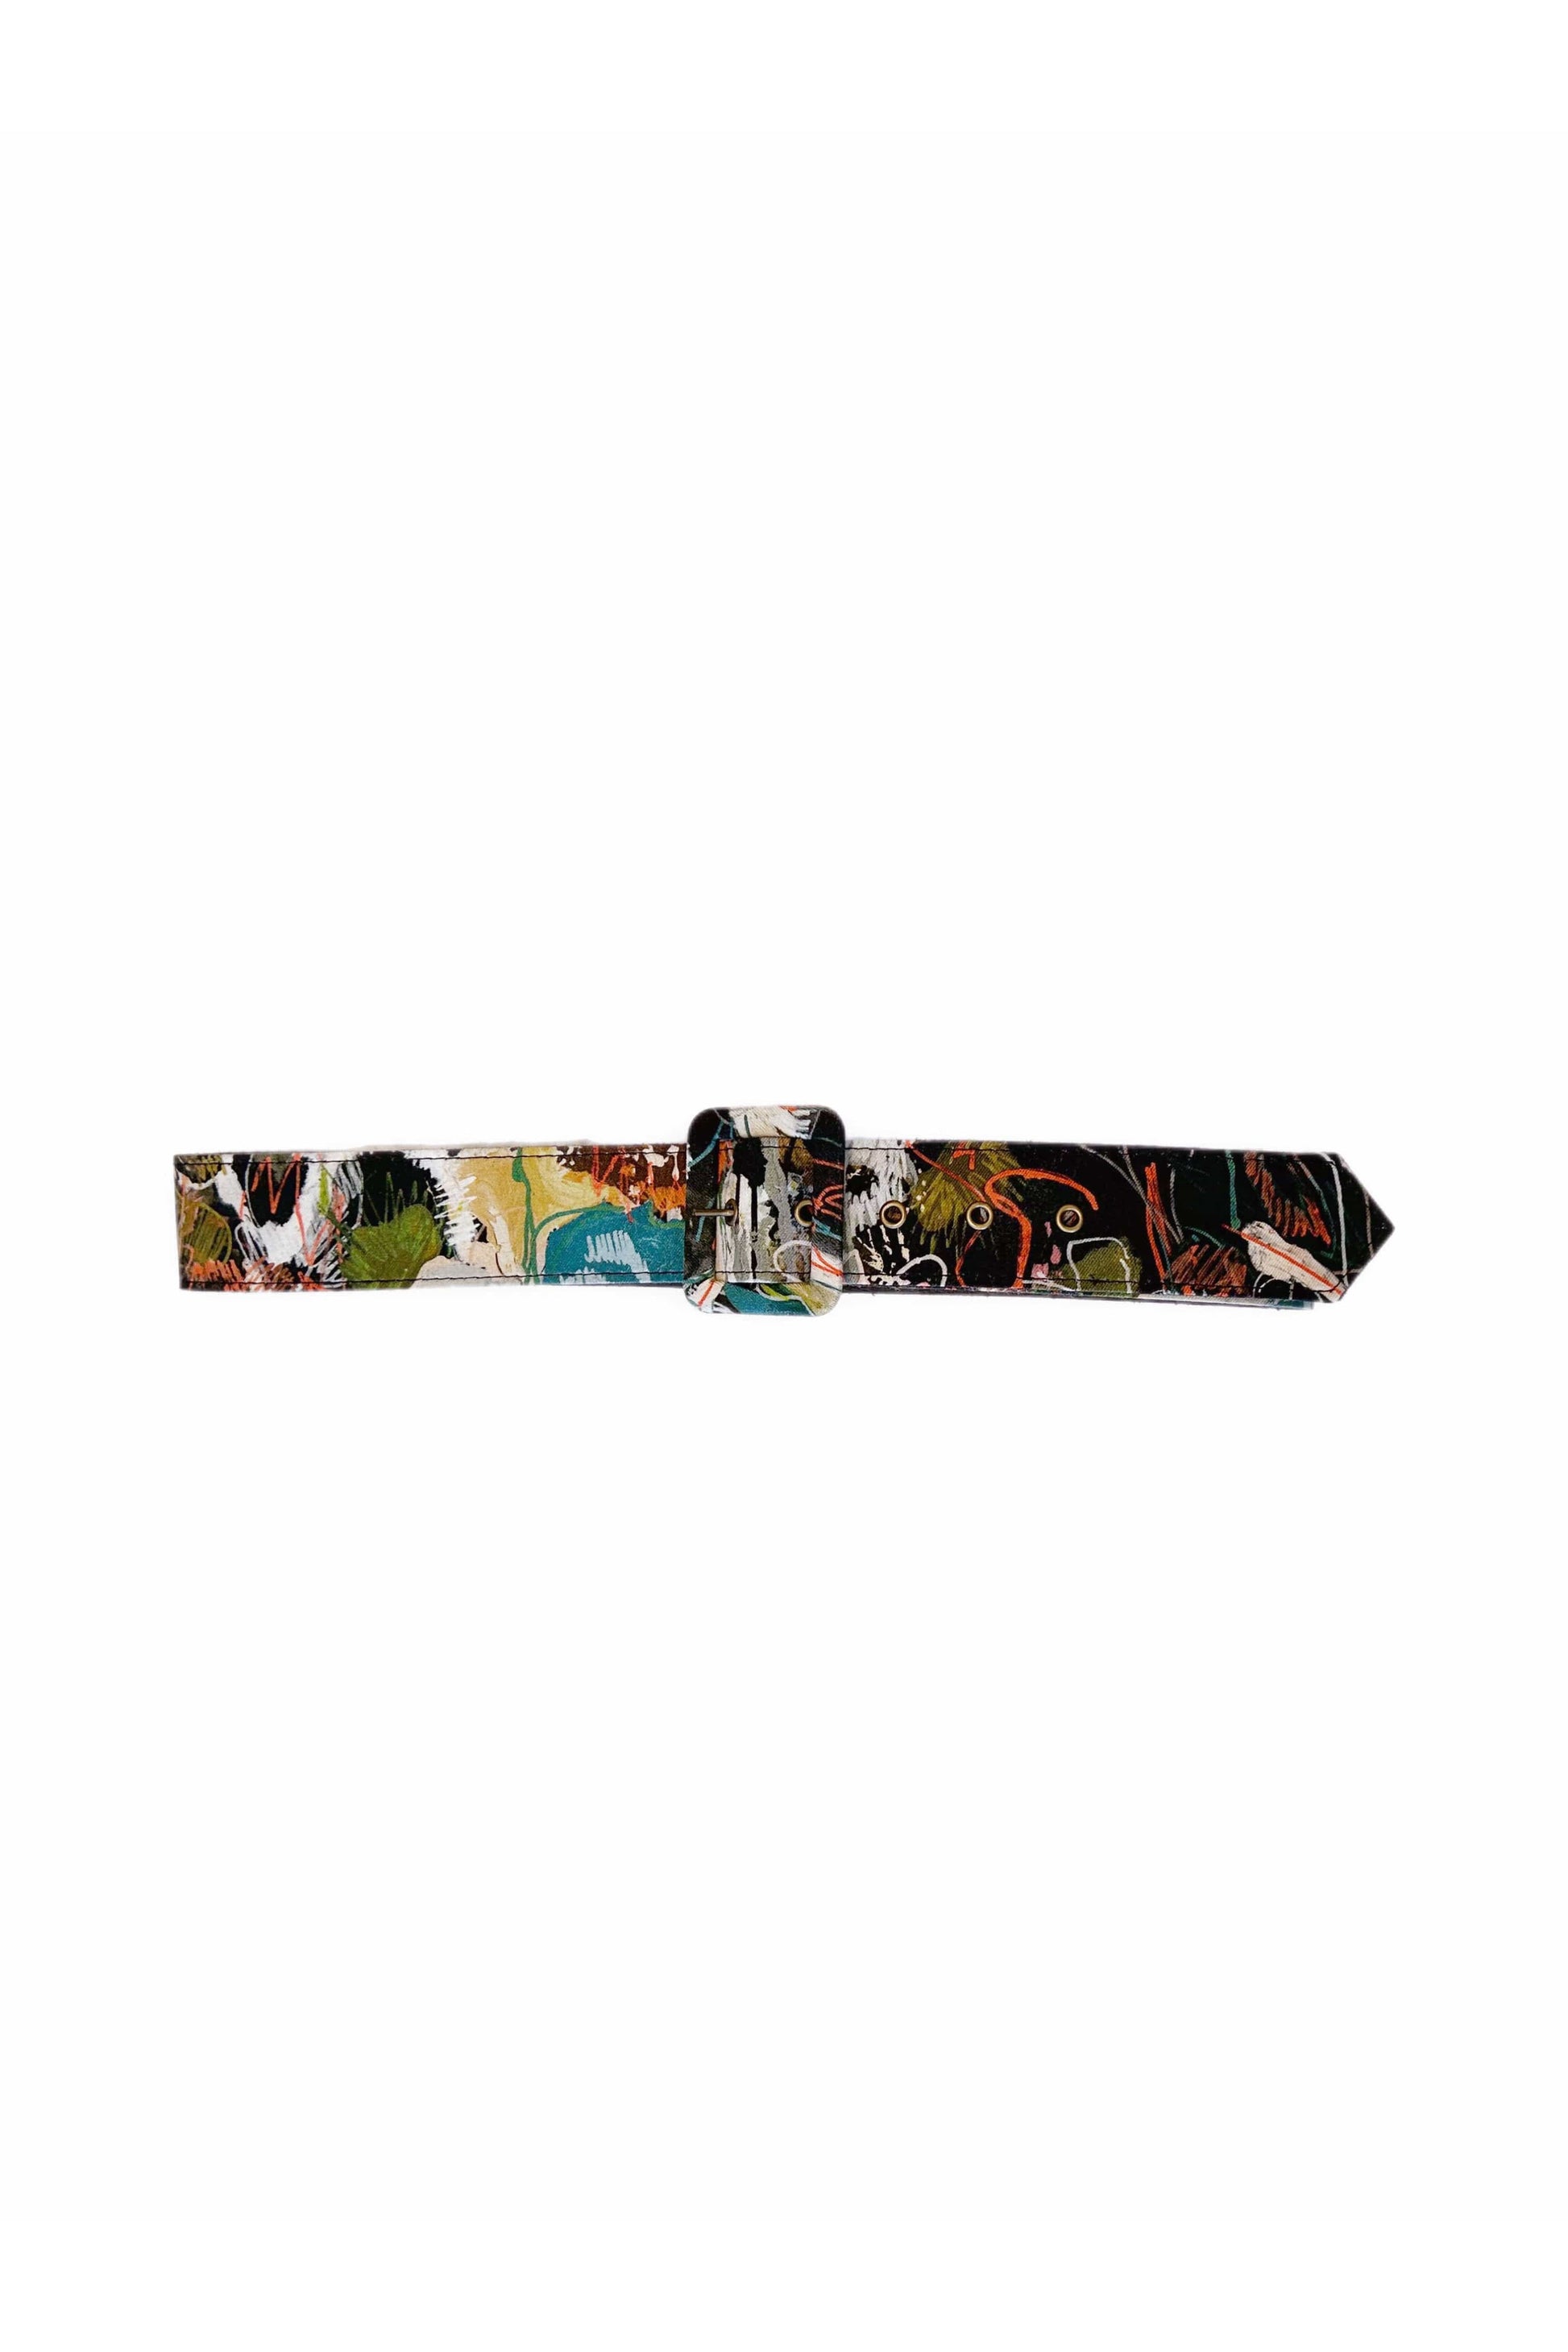 Wide Belt for Nature vs Nurture Collection Belts CHRISTINE ALCALAY Soozy Loopsy XS (28") 